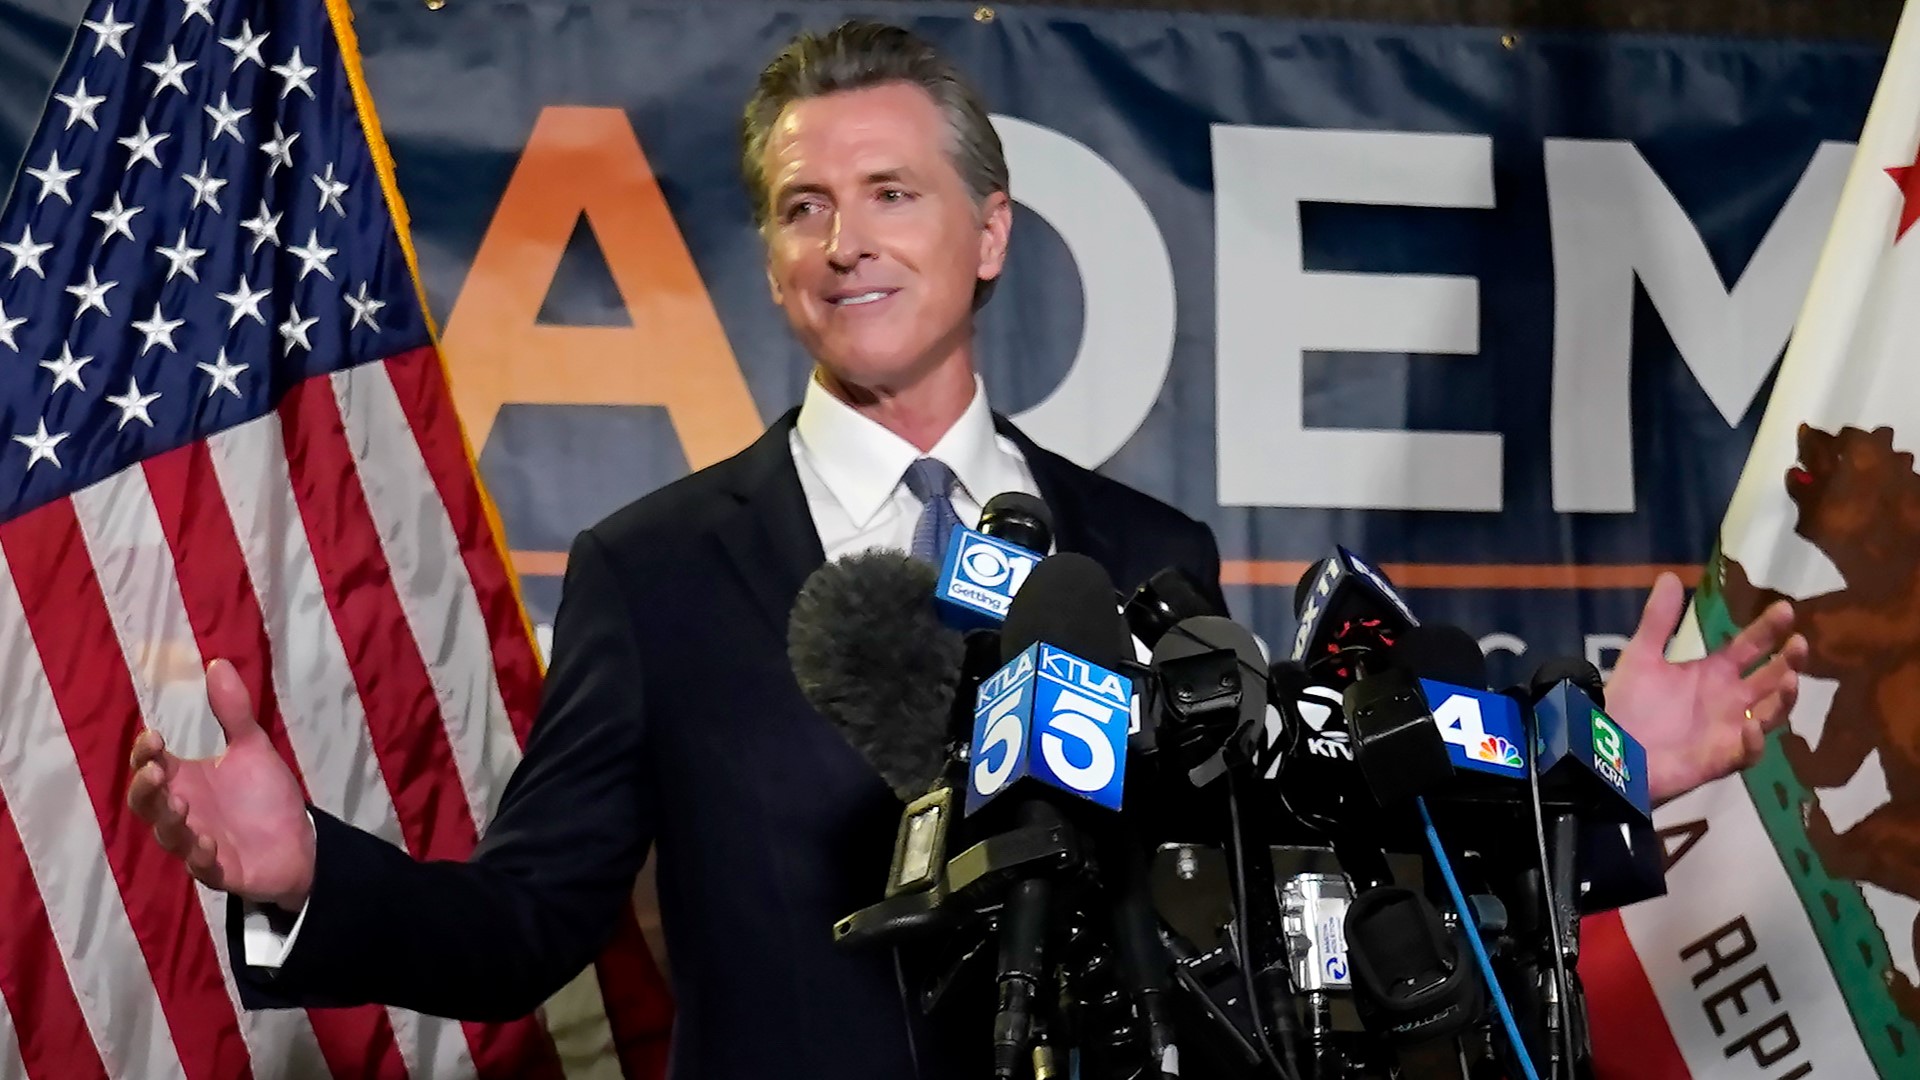 California Gov. Gavin Newsom faced a recall election Tuesday night. Gubernatorial candidate Larry Elder directed visitors of his website to a petition demanding an i